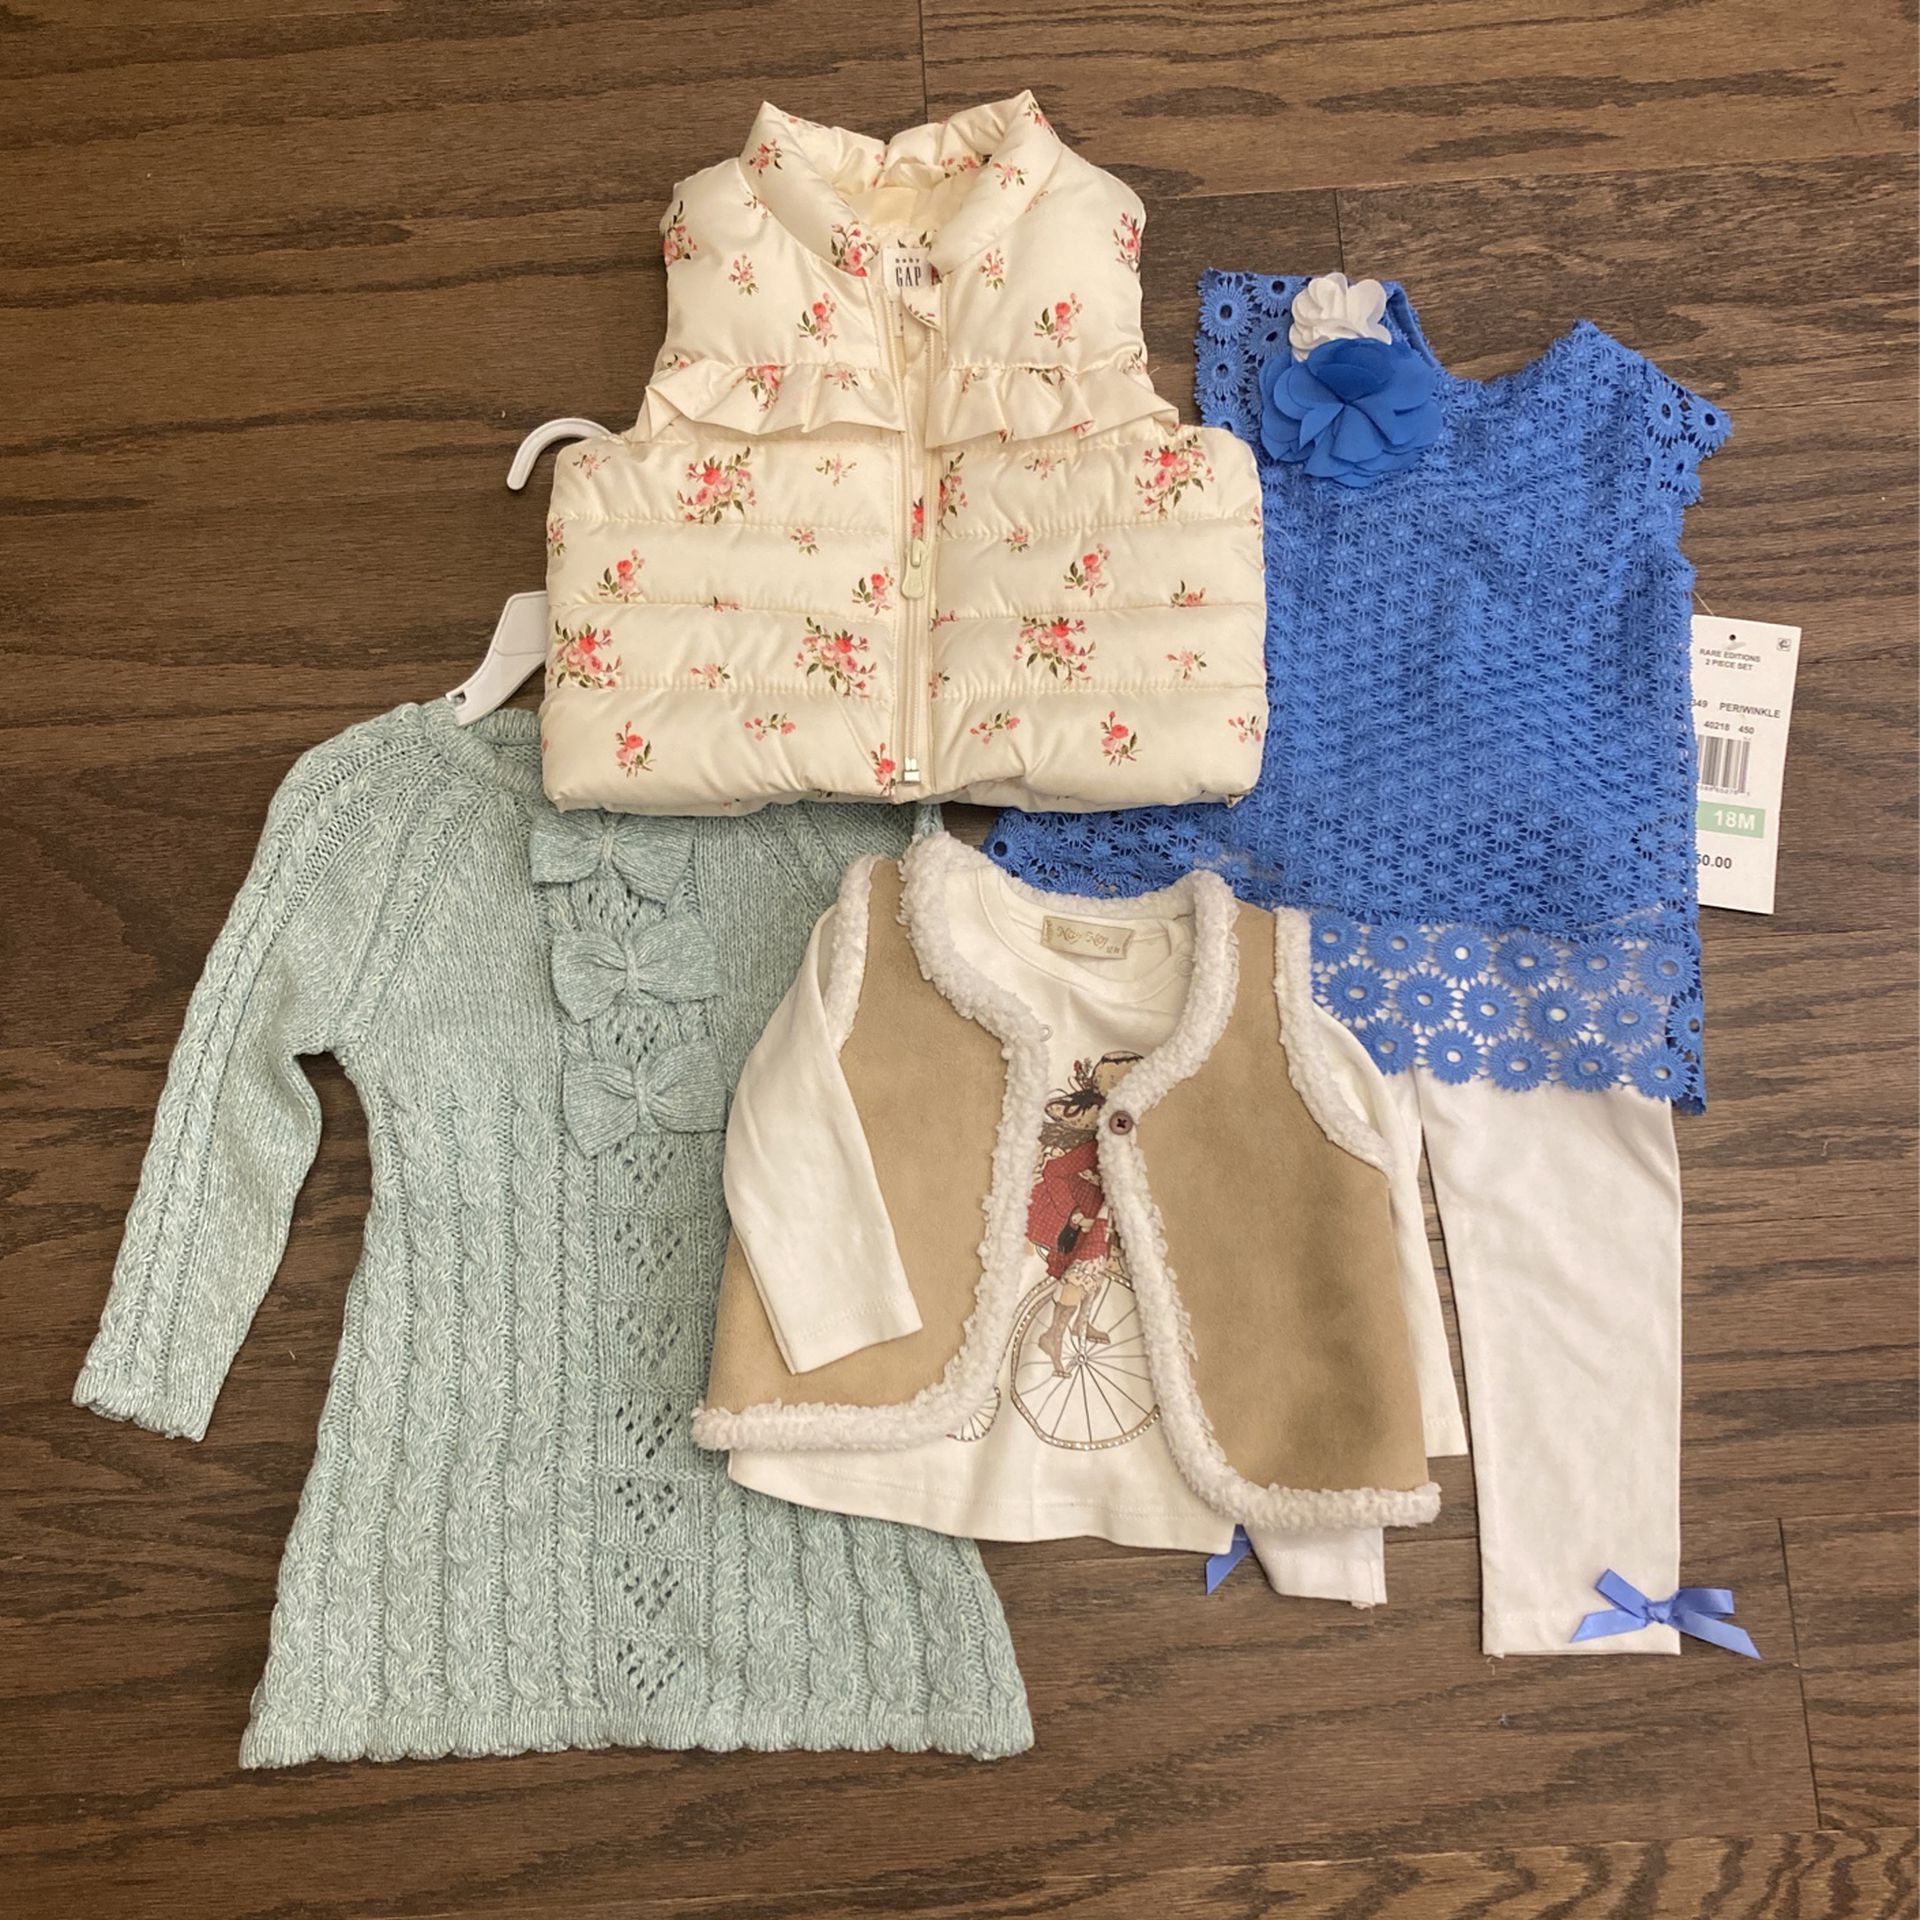 Toddler Girl Clothes 12-18 Months 